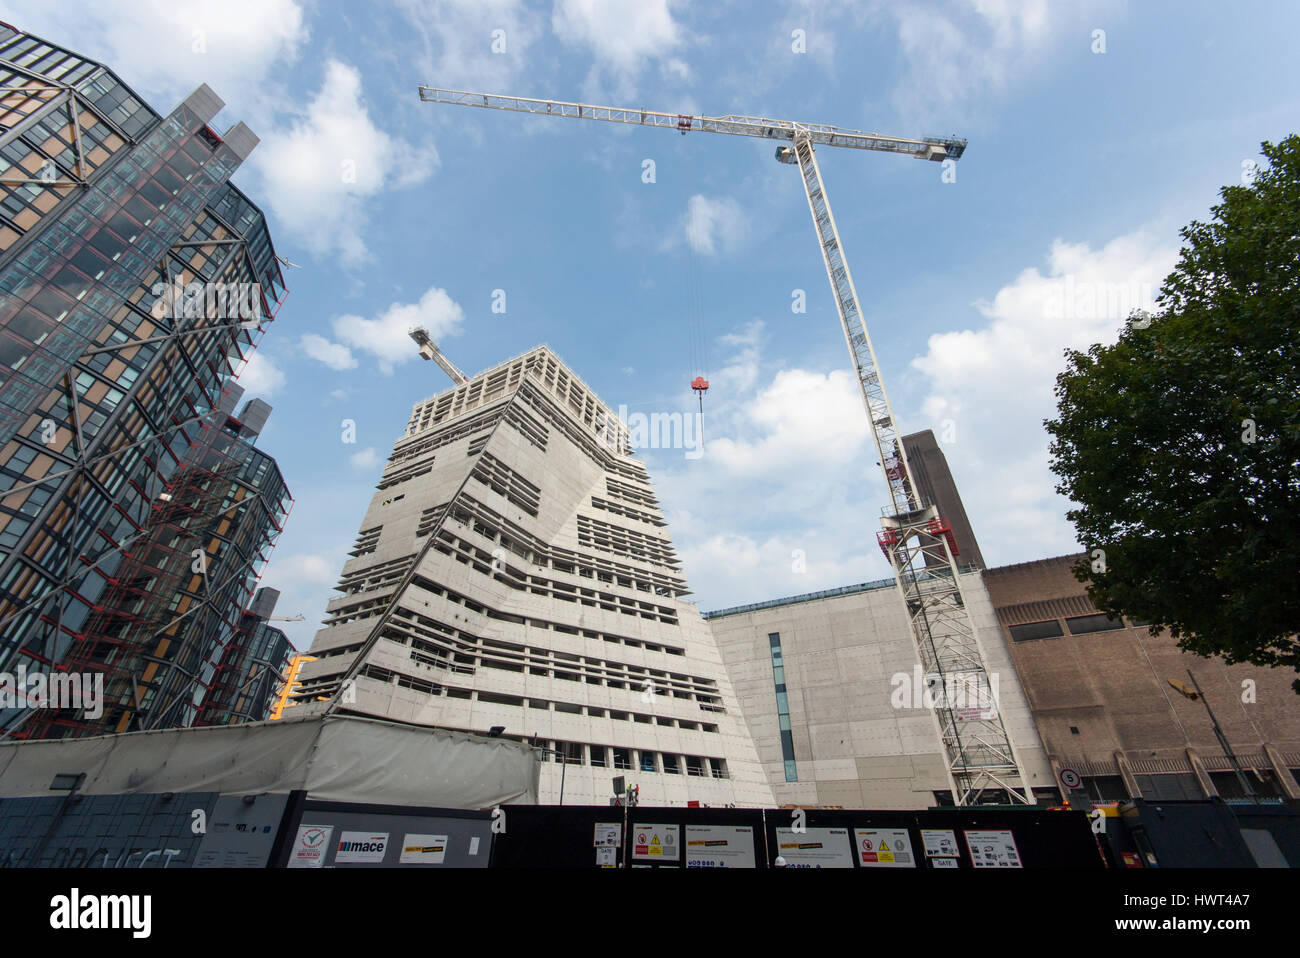 Tate Modern expansion by Herzog & de Meuron architects under construction in September 2014, London, Bankside - Inexhibit Stock Photo